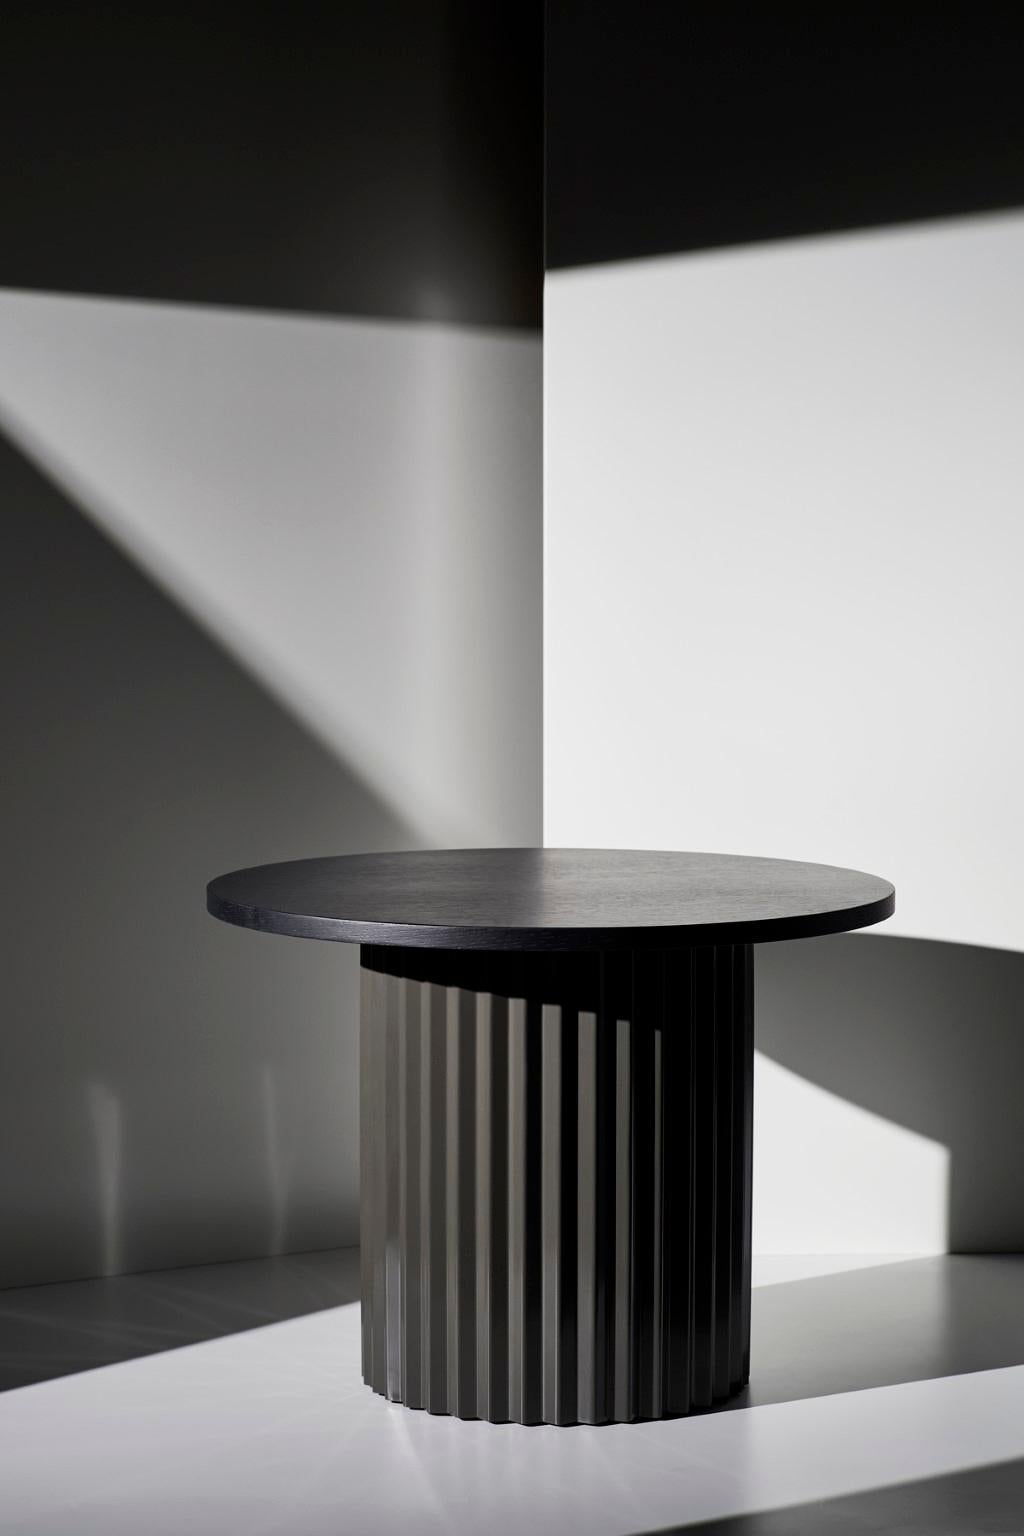 Set of 2 marble tables by Lisette Rützou
Dimensions: 
D 60 x H 41 cm
D 40 x H 41 cm
Materials: Marble tabletop, Brass Column

 Lisette Rützou’s design is motivated by an urge to articulate a story. Inspired by the beauty of materials, form and